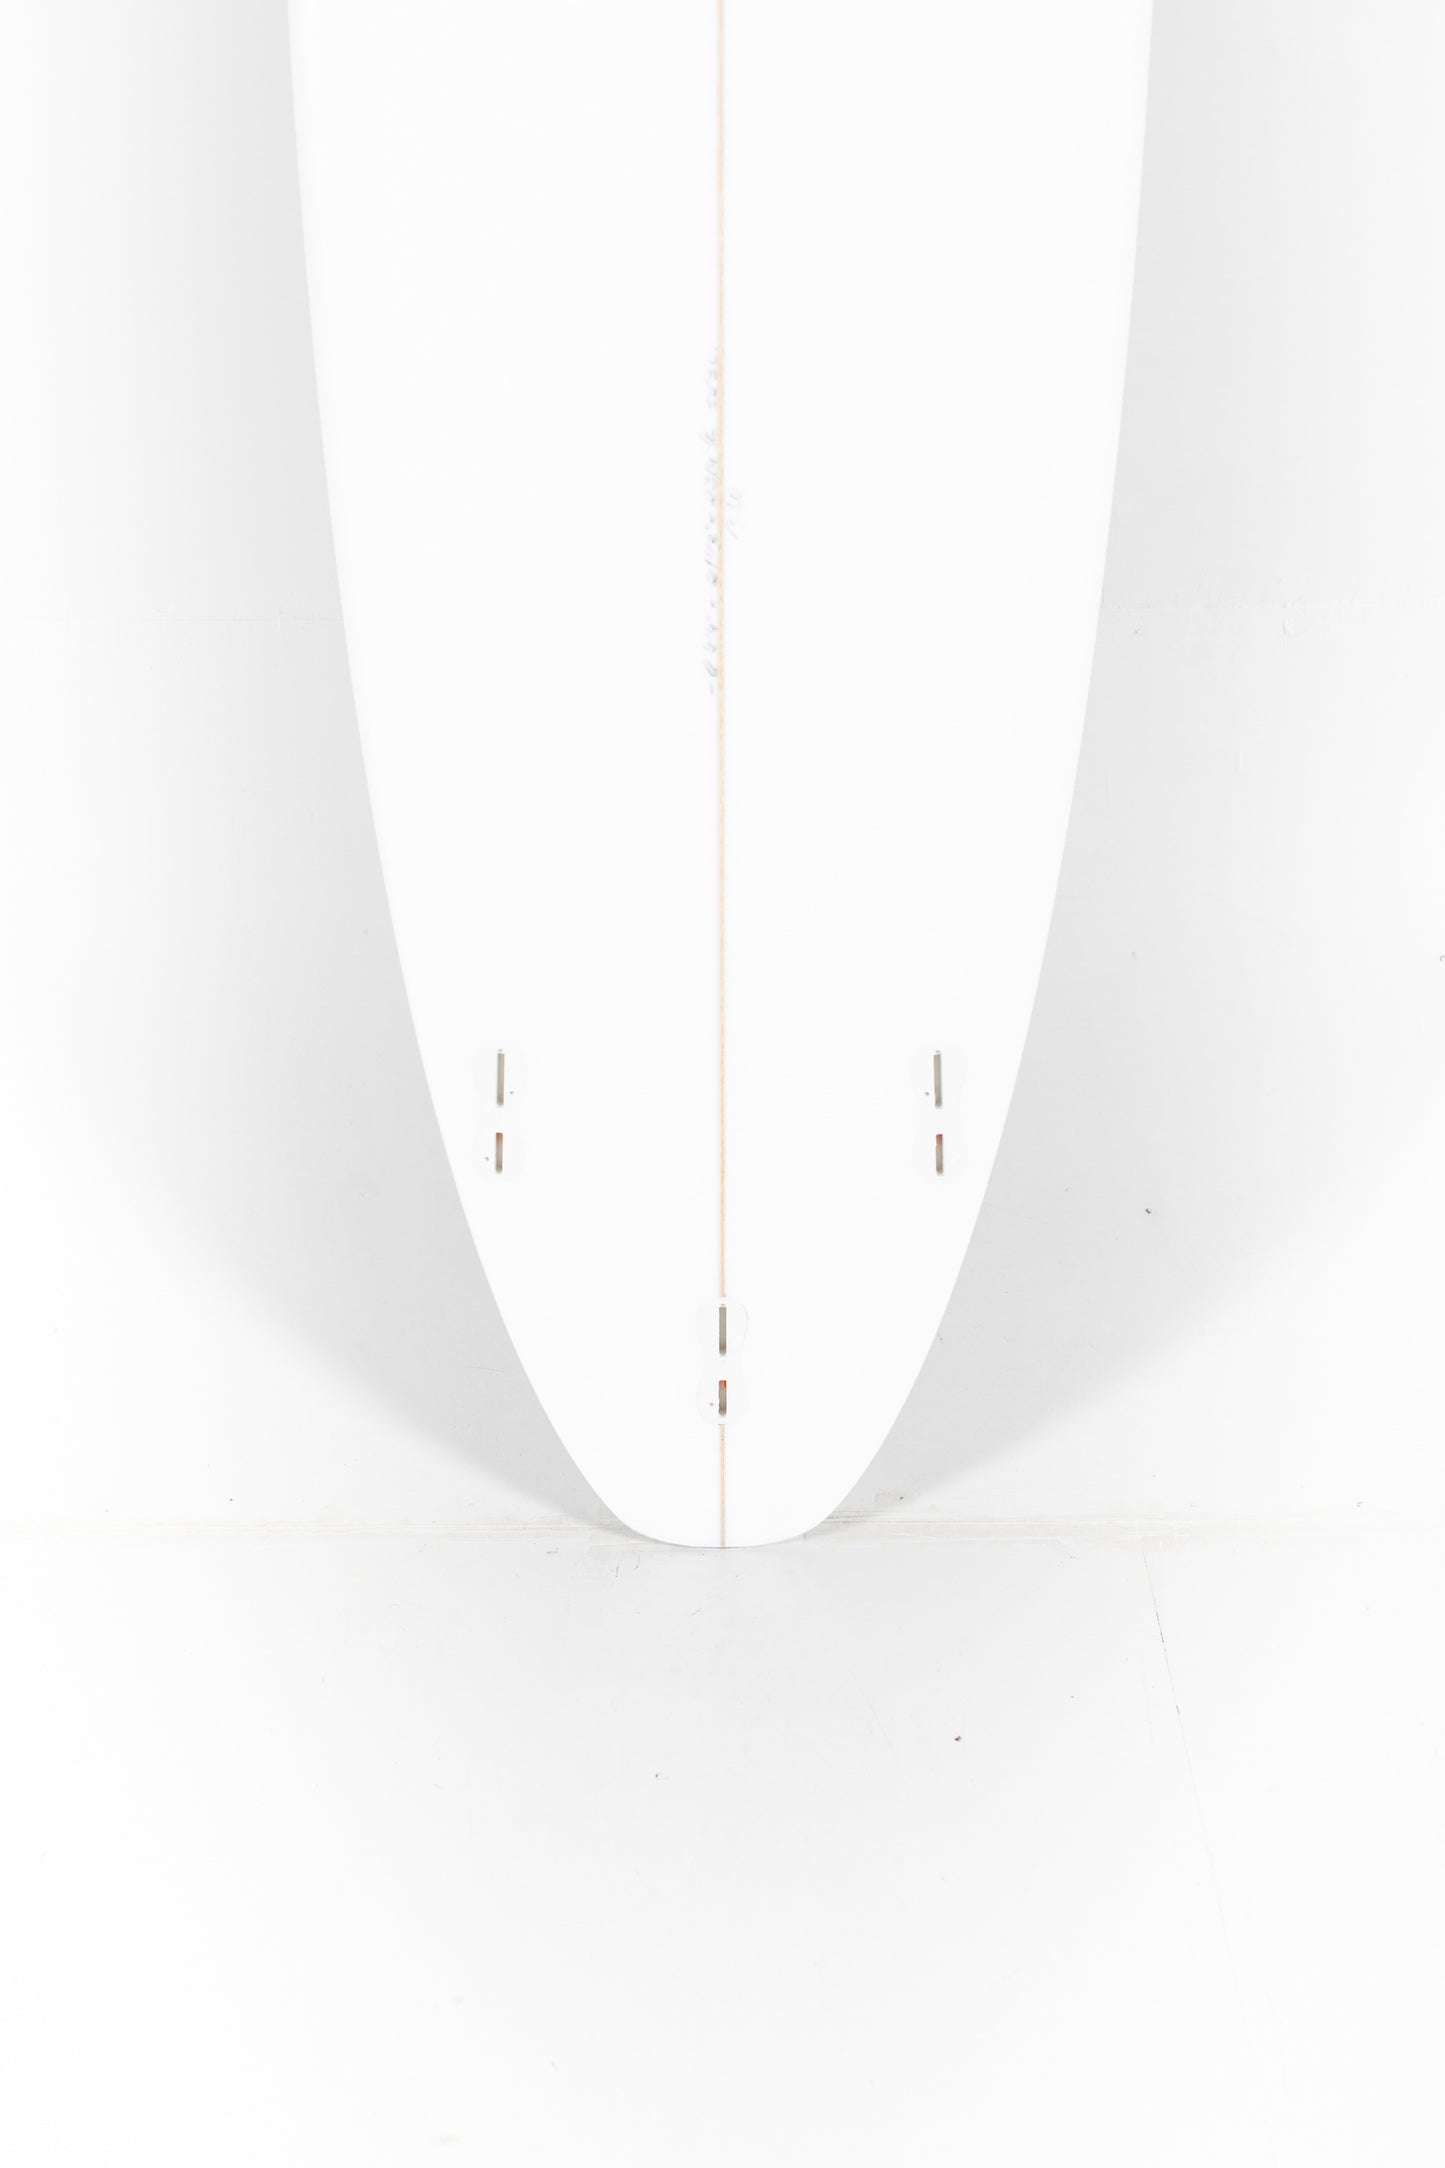 
                  
                    BW SURFBOARDS - BW SURFBOARDS Evolutivo 7'4" x 21 1/2 x 2 3/4 x 52.3L. at PUKAS SURF SHOP
                  
                